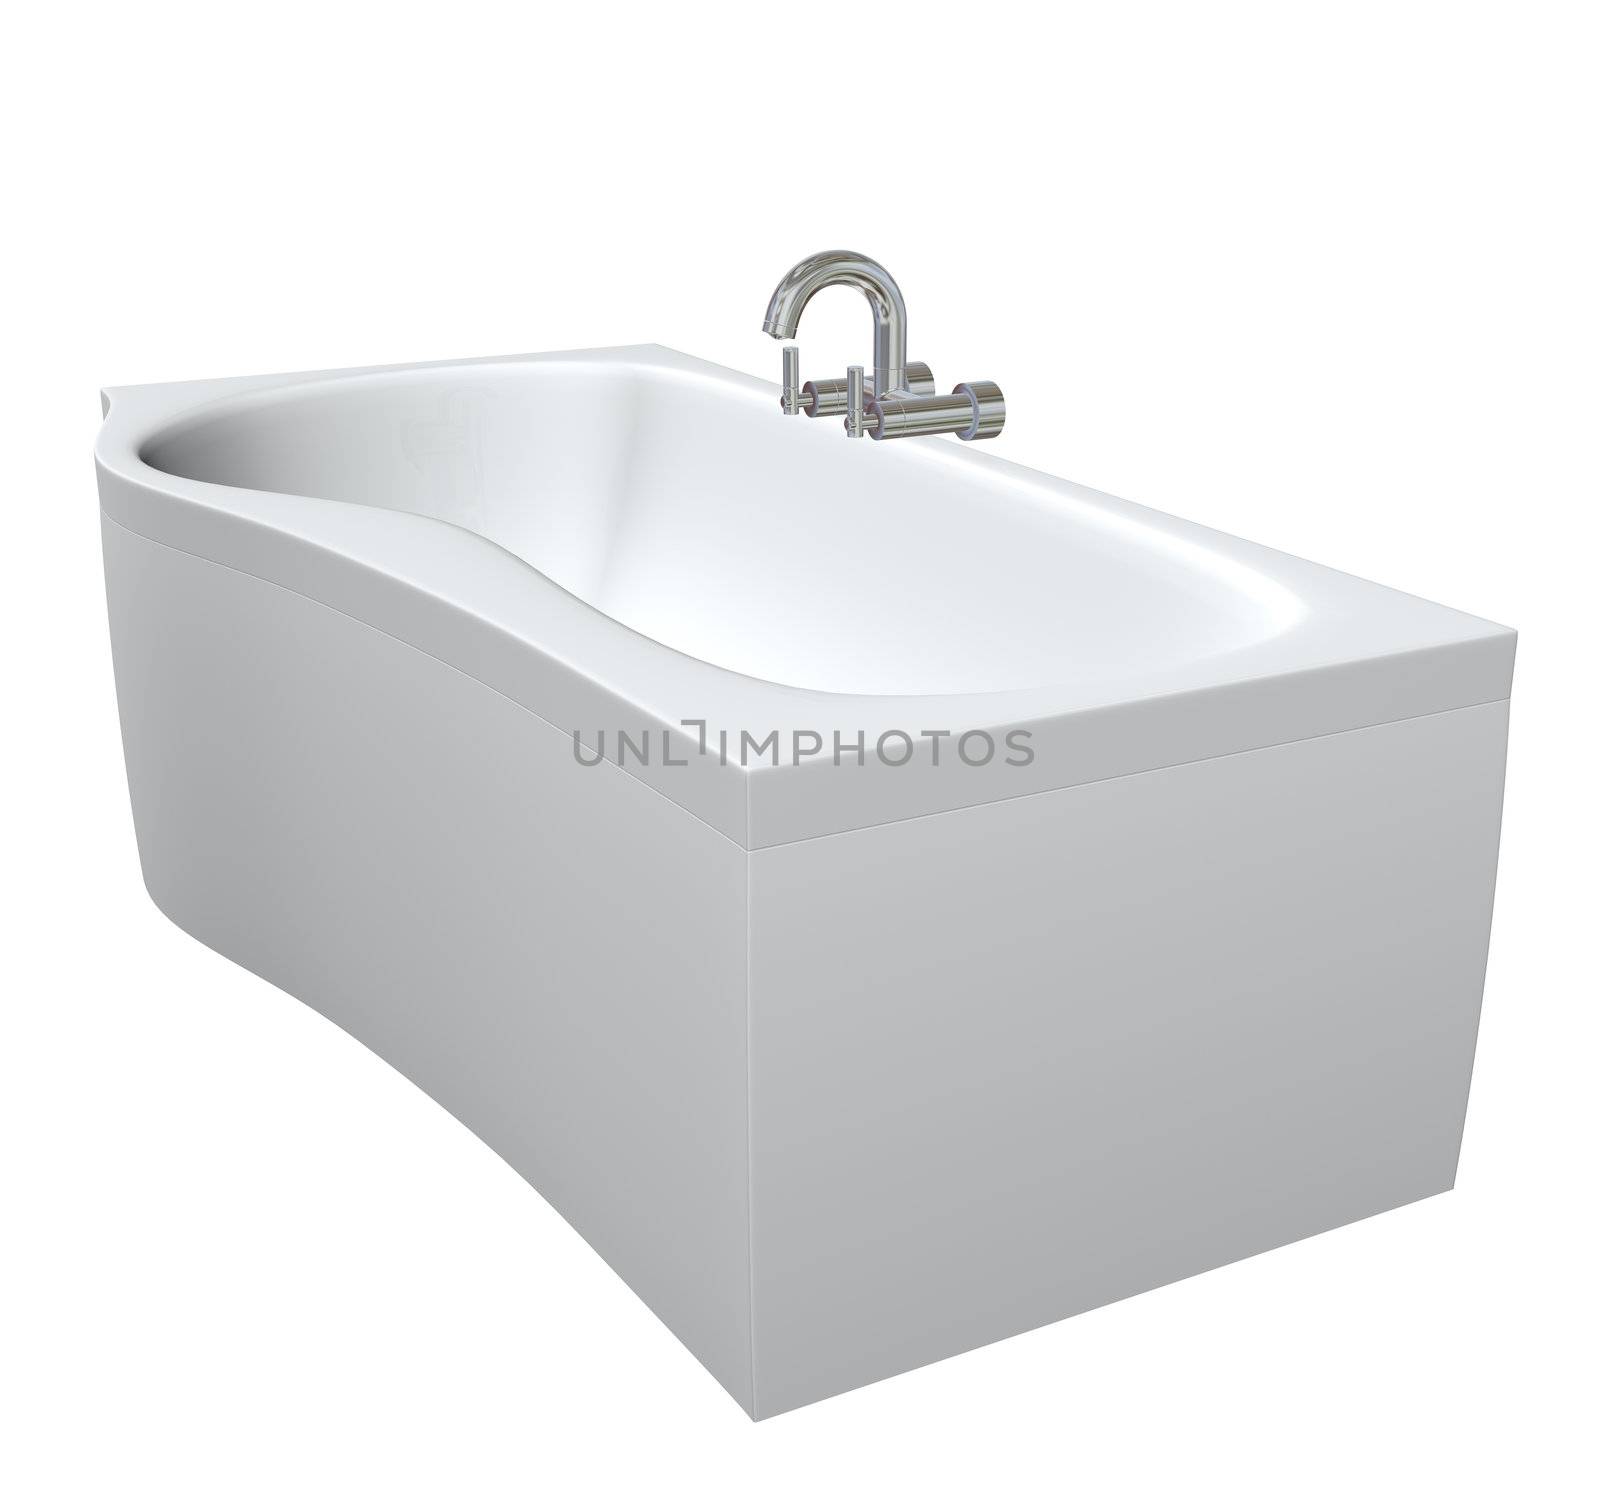 Ceramic or acrylc bath tub set with chrome fixtures and faucet, 3d illustration, isolated against a white background